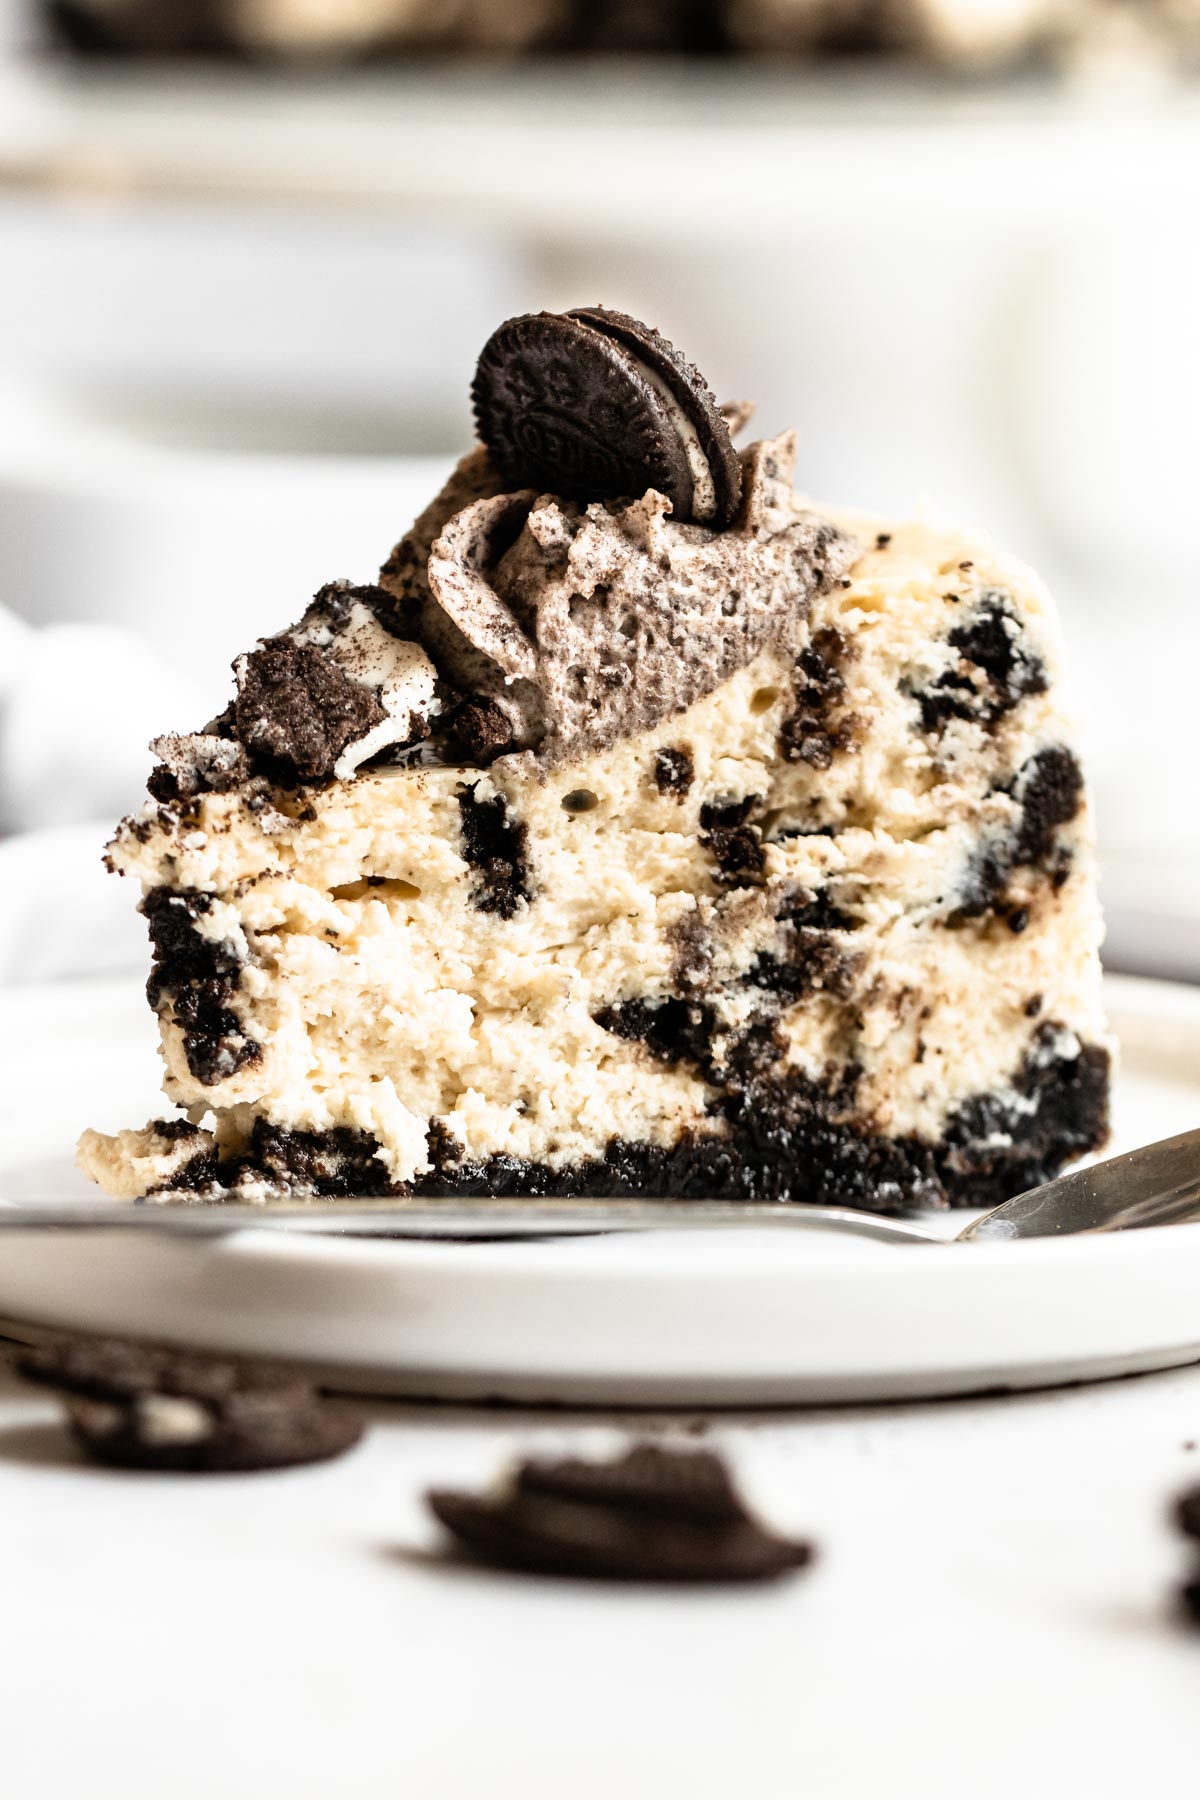 Slice of oreo cheesecake on a plate.